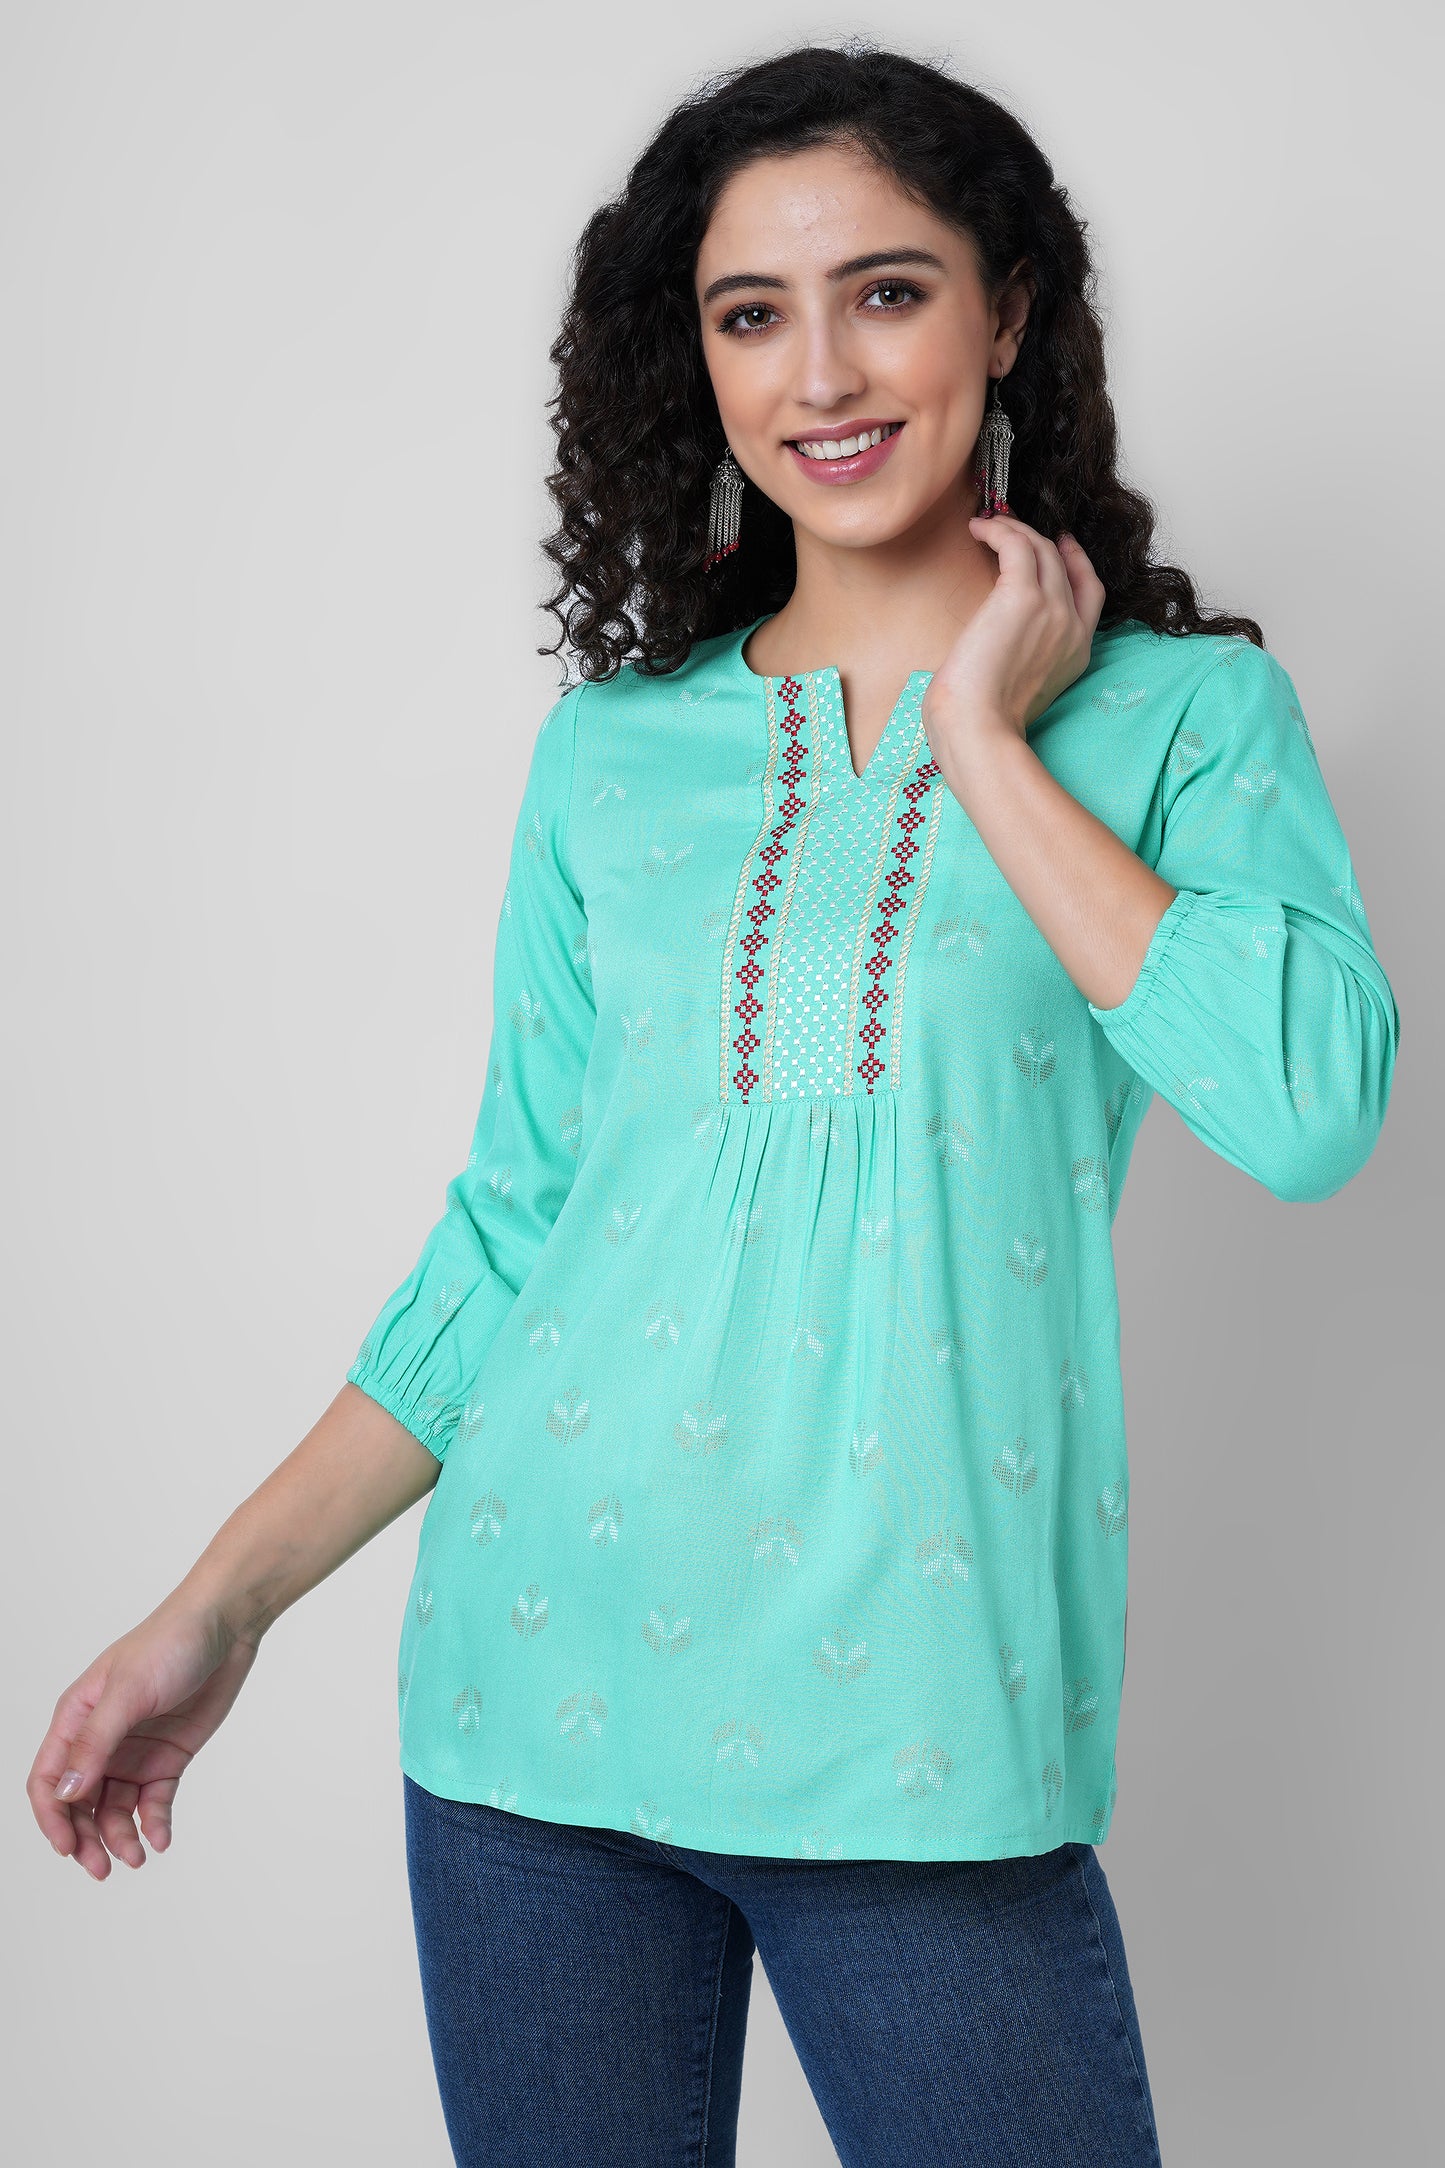 Turquoise Top With Border Embroidery